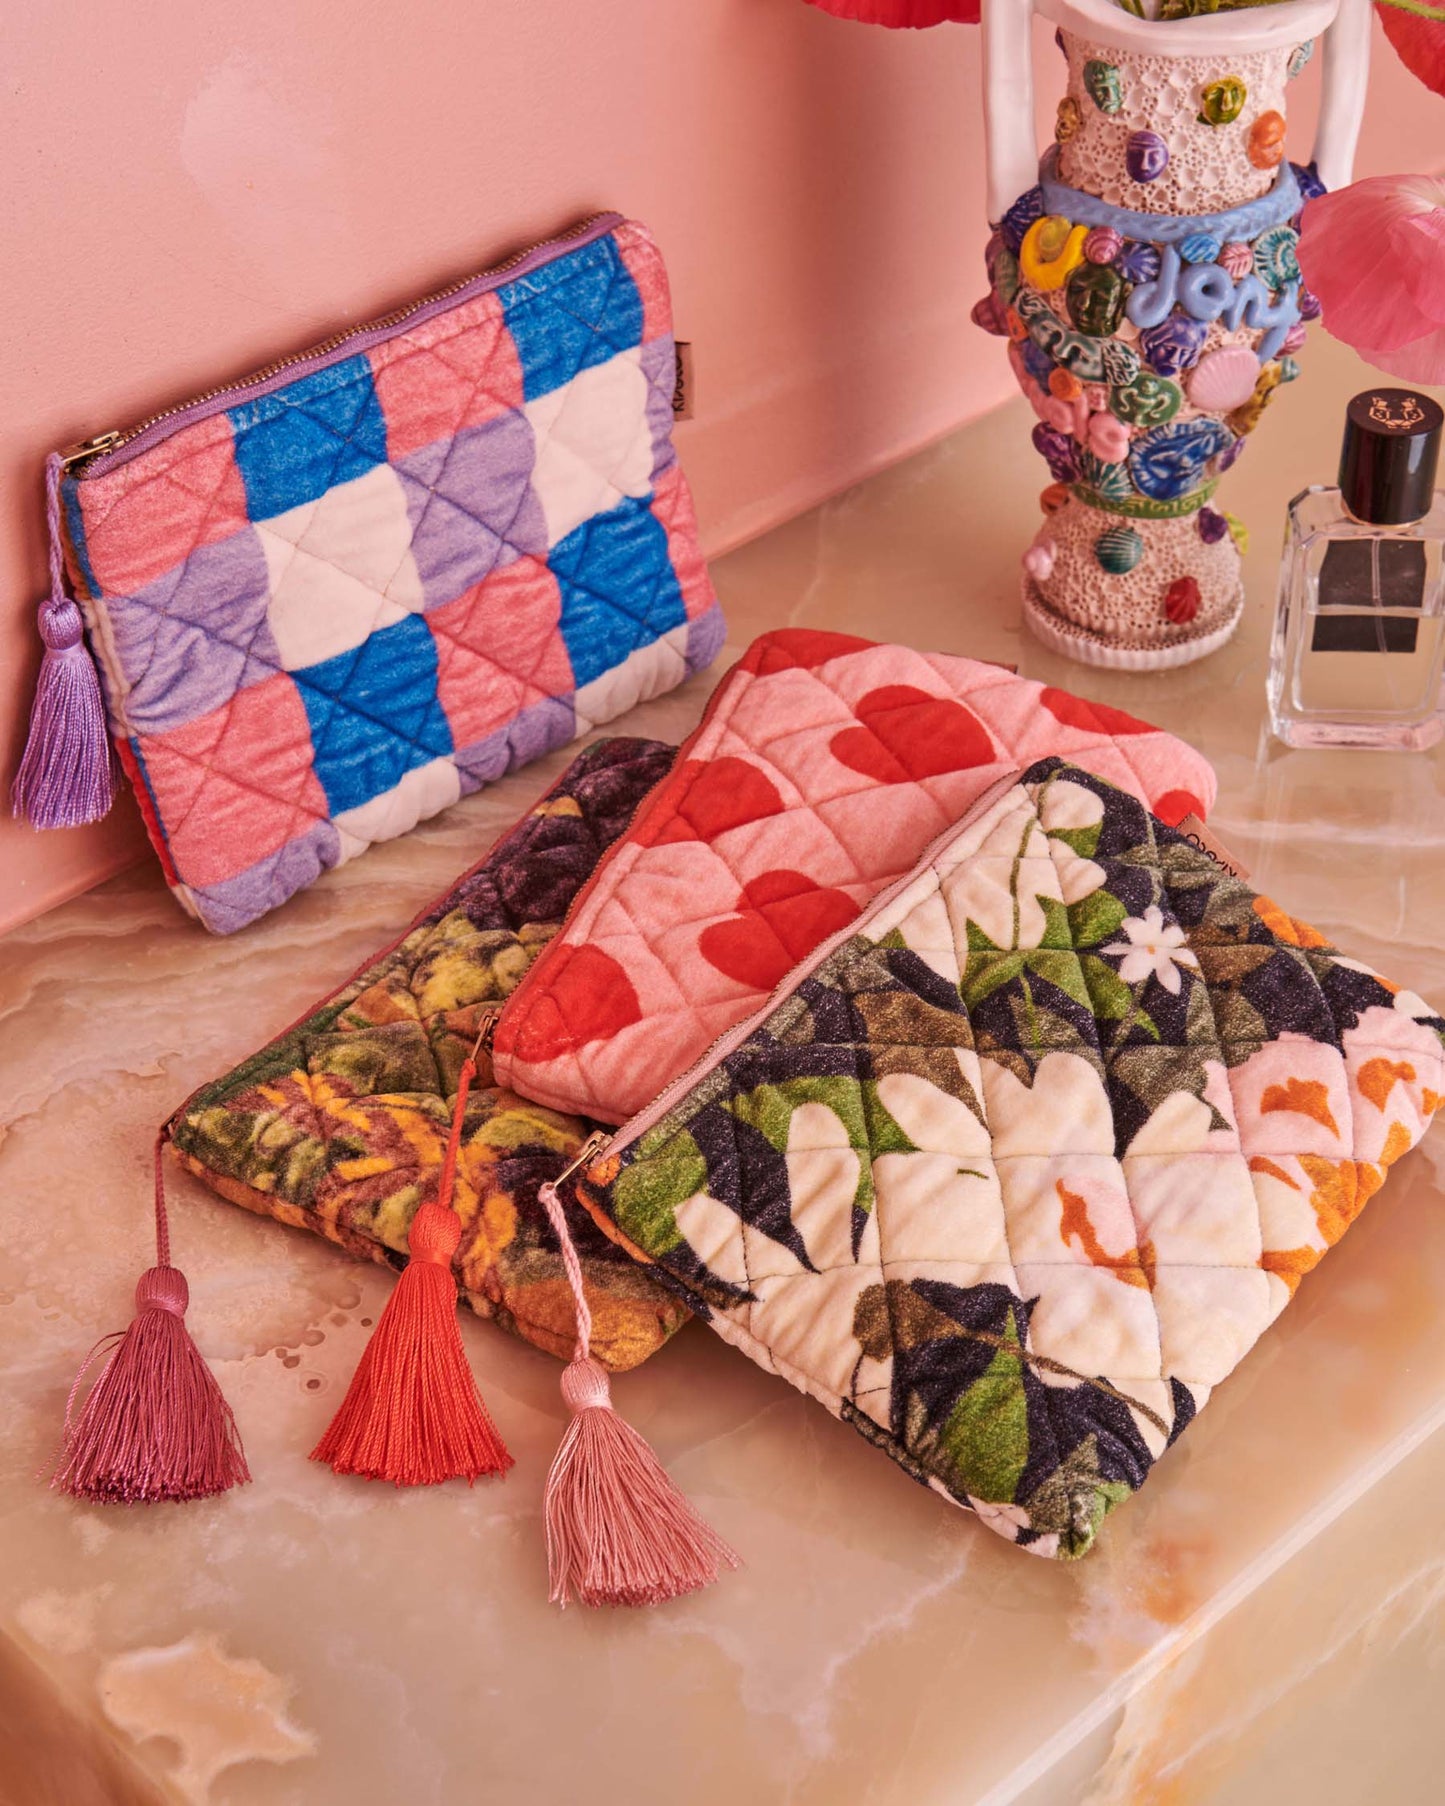  Kip&Co is your destination for toiletry essentials! Our cosmetic and toiletry bags are tried and tested travel favourites, perfectly sized for your favourite skincare and cosmetic must-haves. The Summer Check Velvet Cosmetics Purse features printed quilted velvet with a check pattern of pink, purple, blue, red, mustard brown and white with feature purple zip tassel.